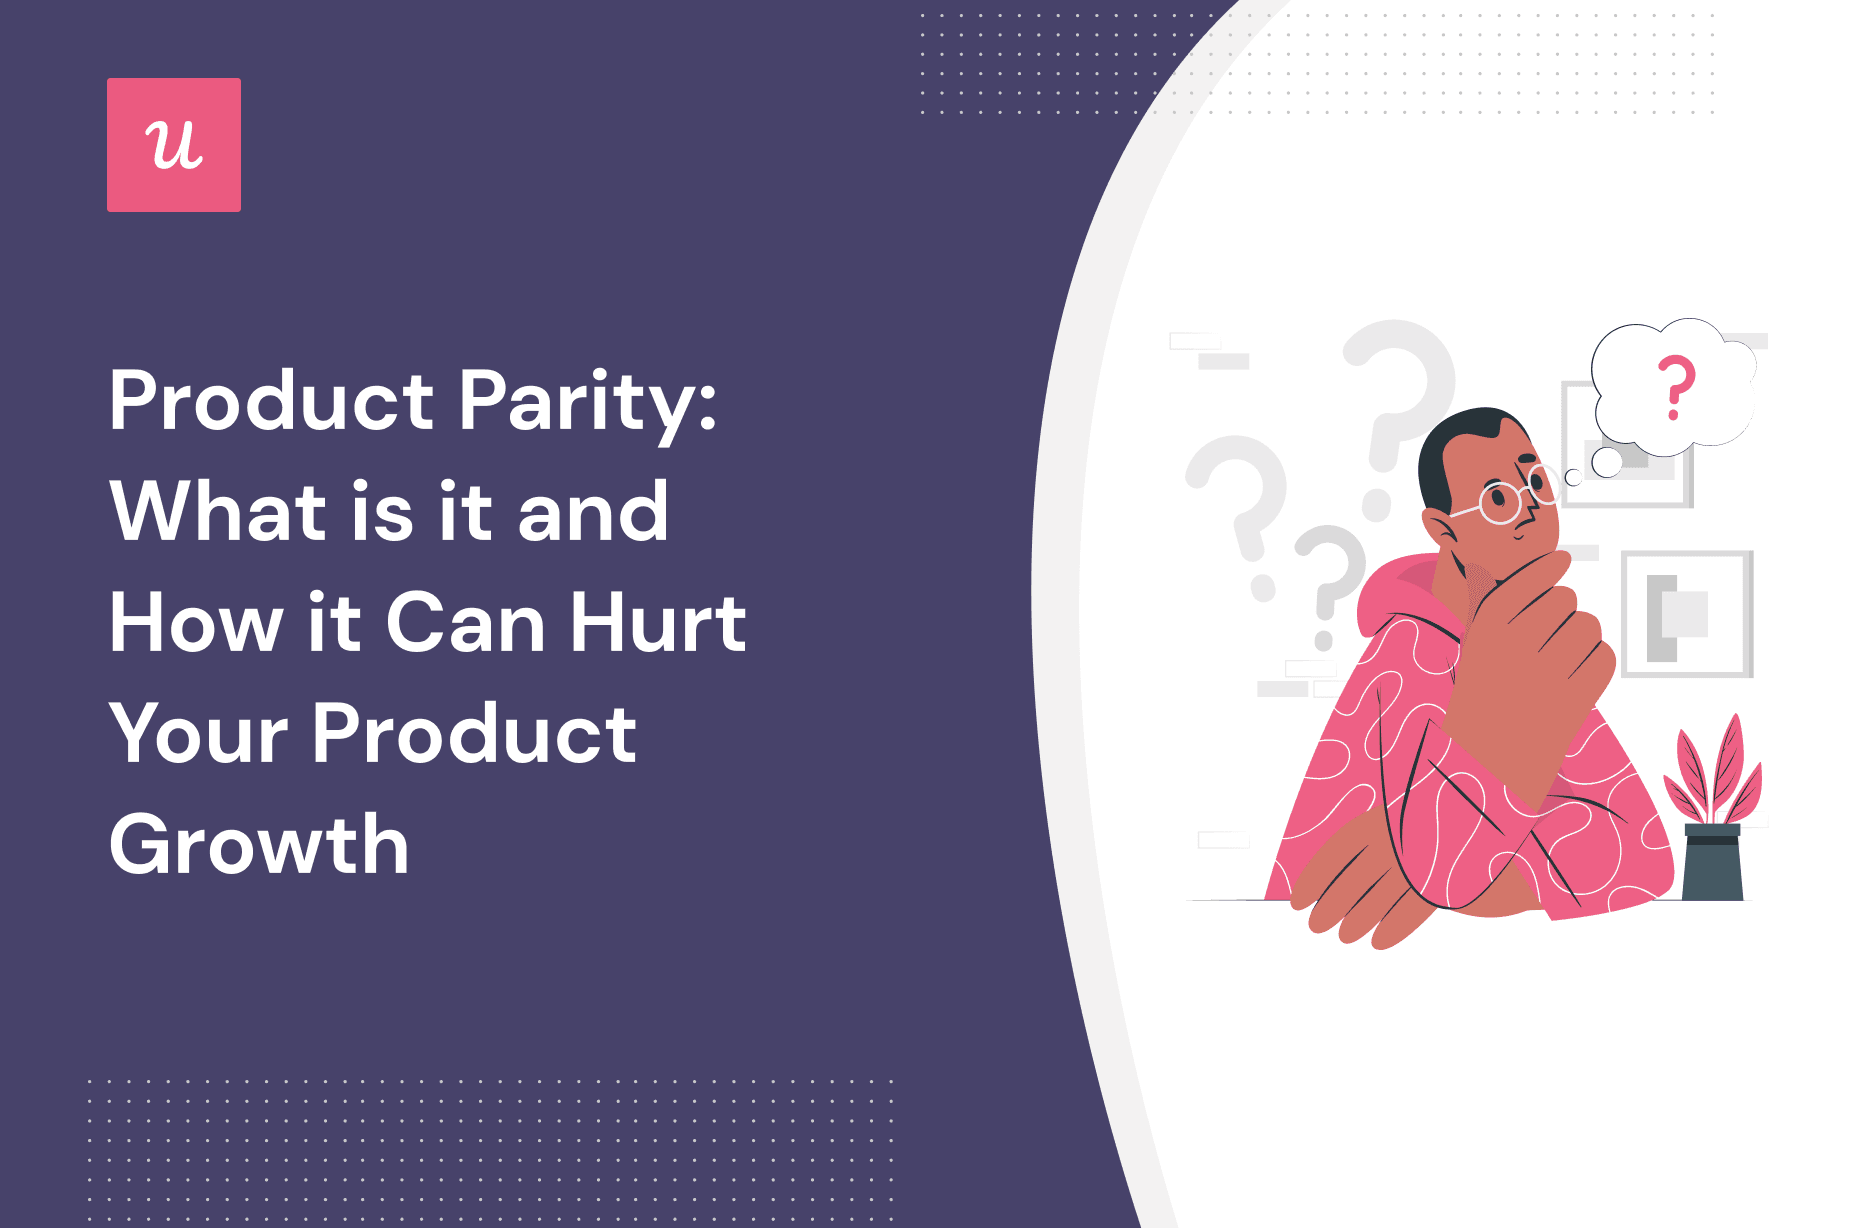 Product Parity: What is it and How it Can Hurt Your Product Growth cover